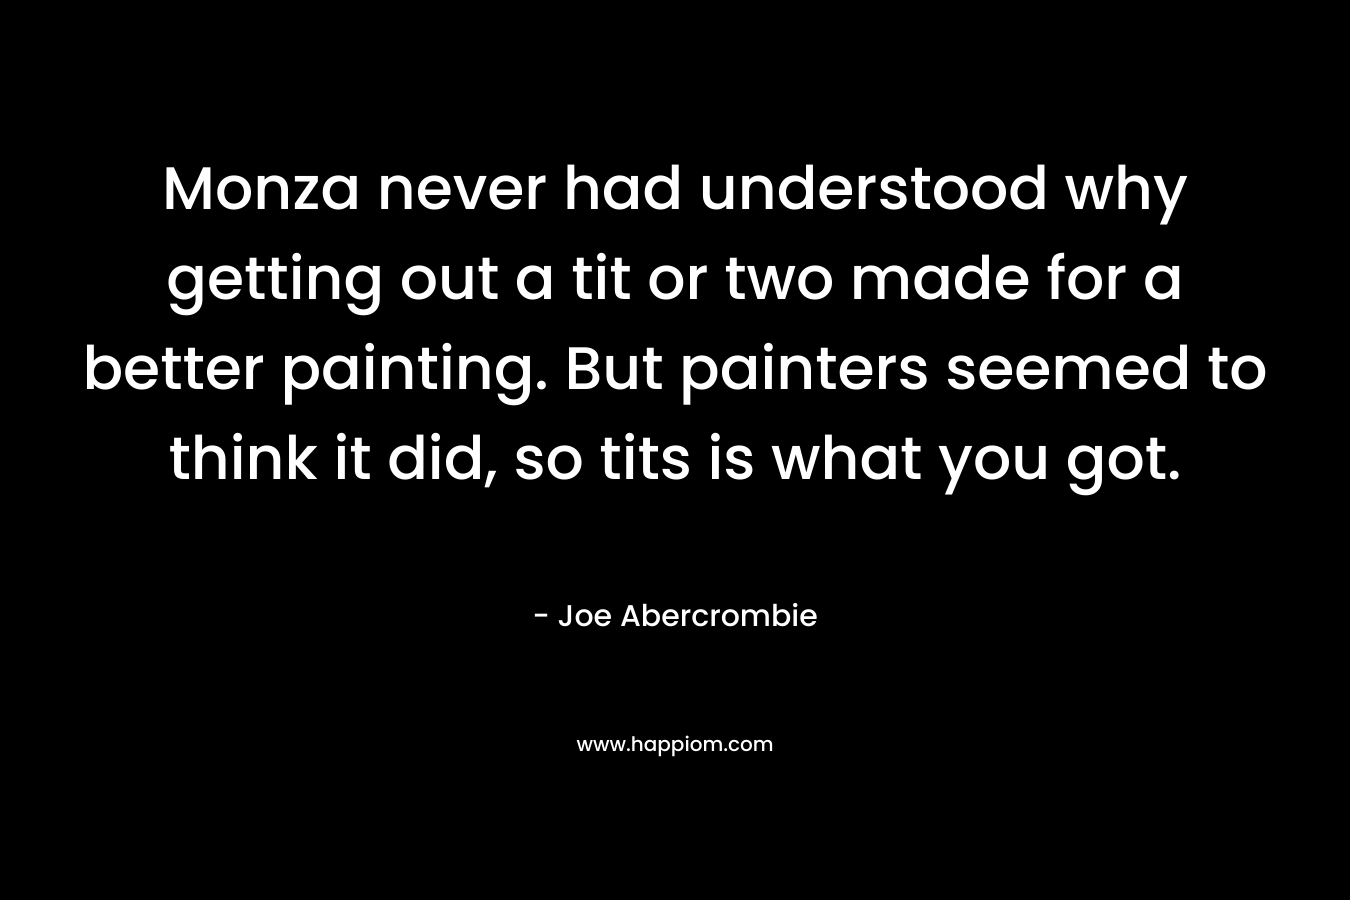 Monza never had understood why getting out a tit or two made for a better painting. But painters seemed to think it did, so tits is what you got. – Joe Abercrombie